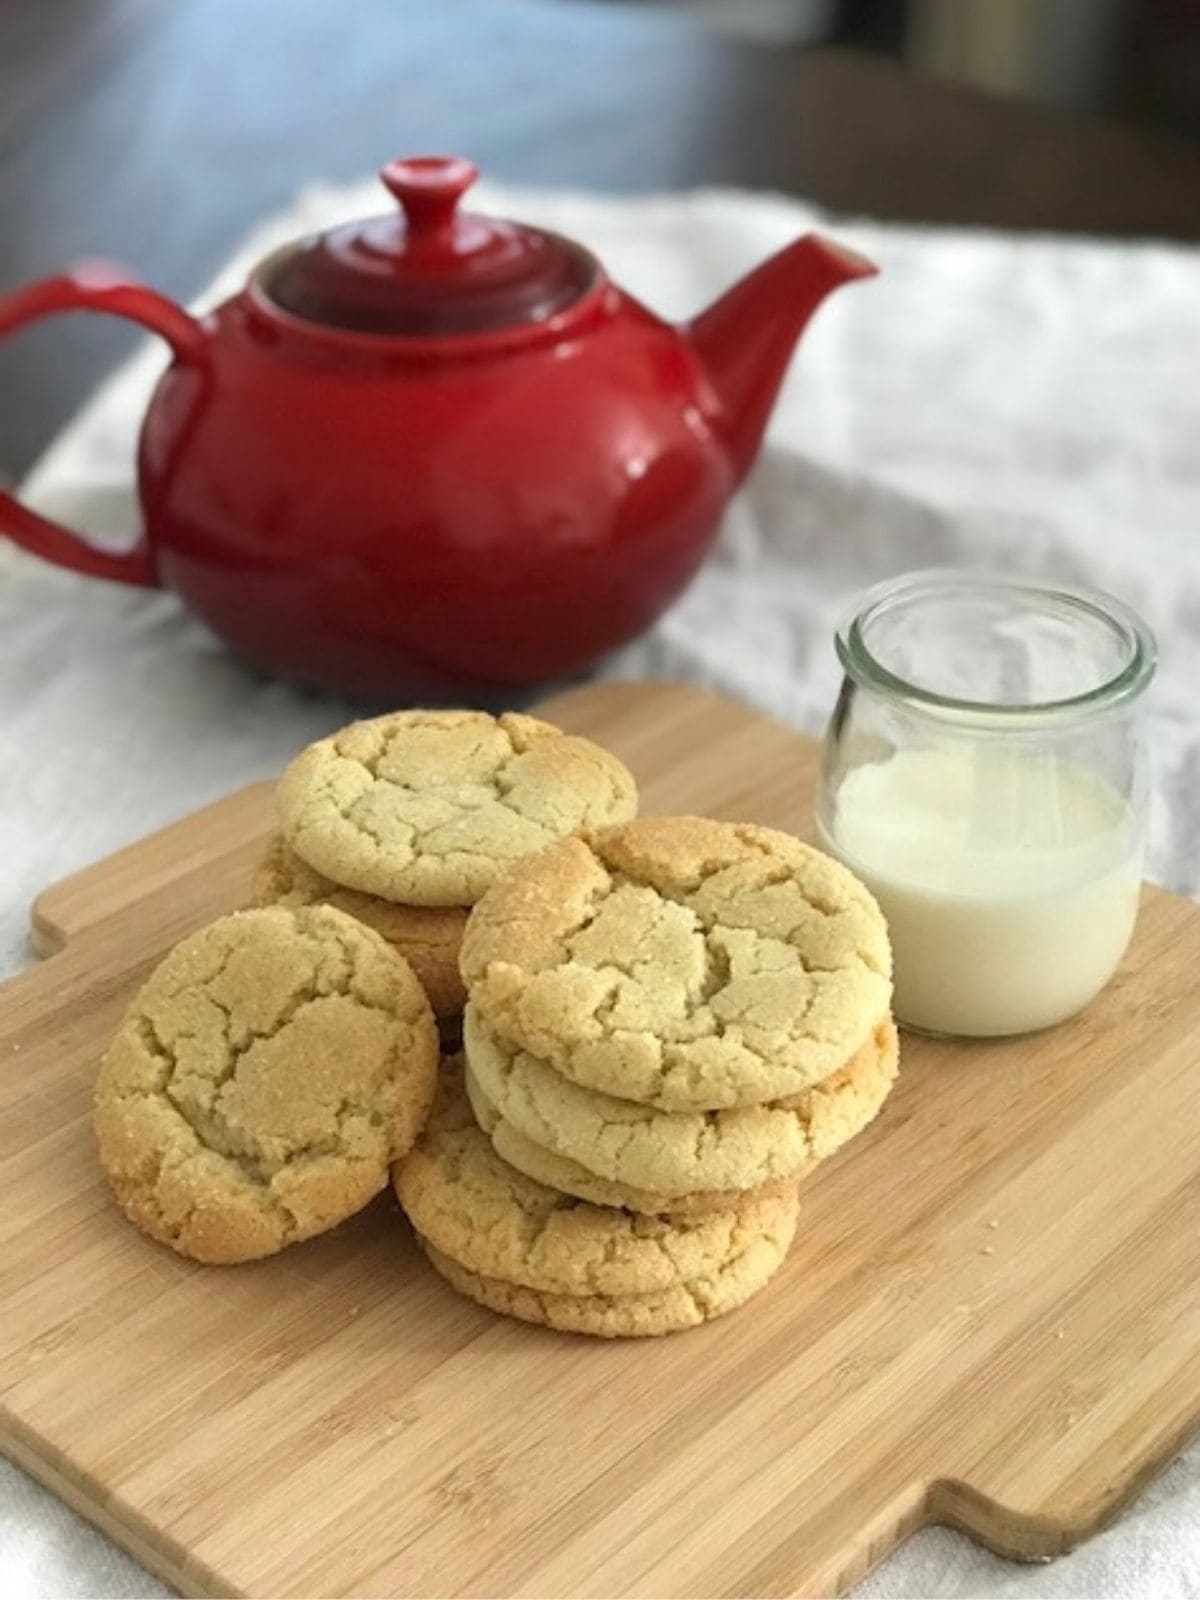 A pile of sugar cookies on a wooden board with a red teapot and beaker of milk.